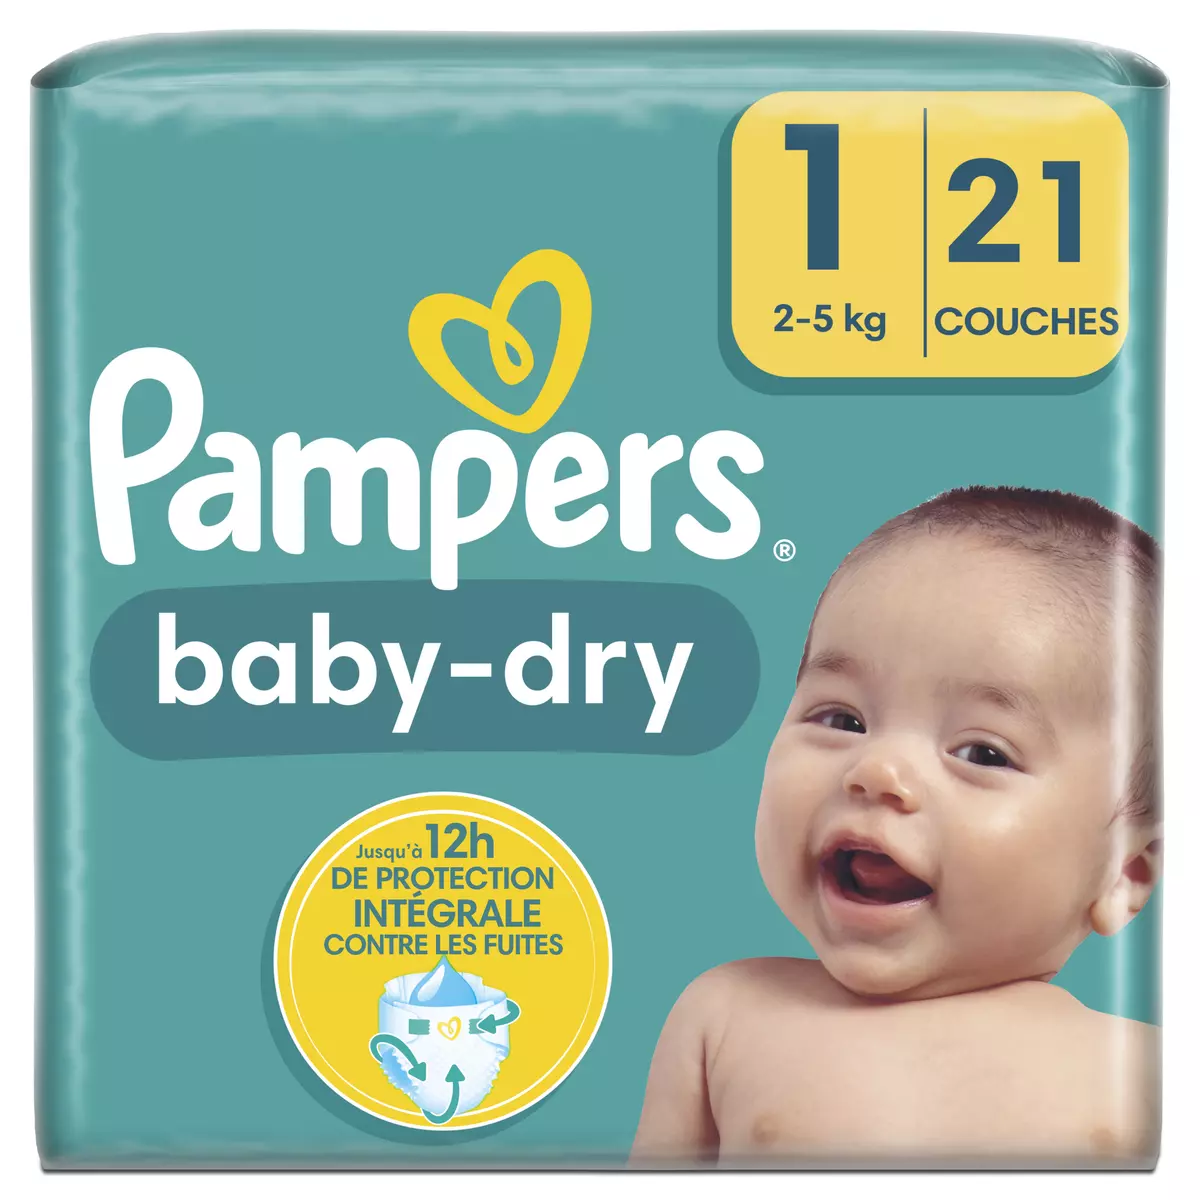 PAMPERS Baby-Dry couches taille 1 (2-5kg) 21 couches